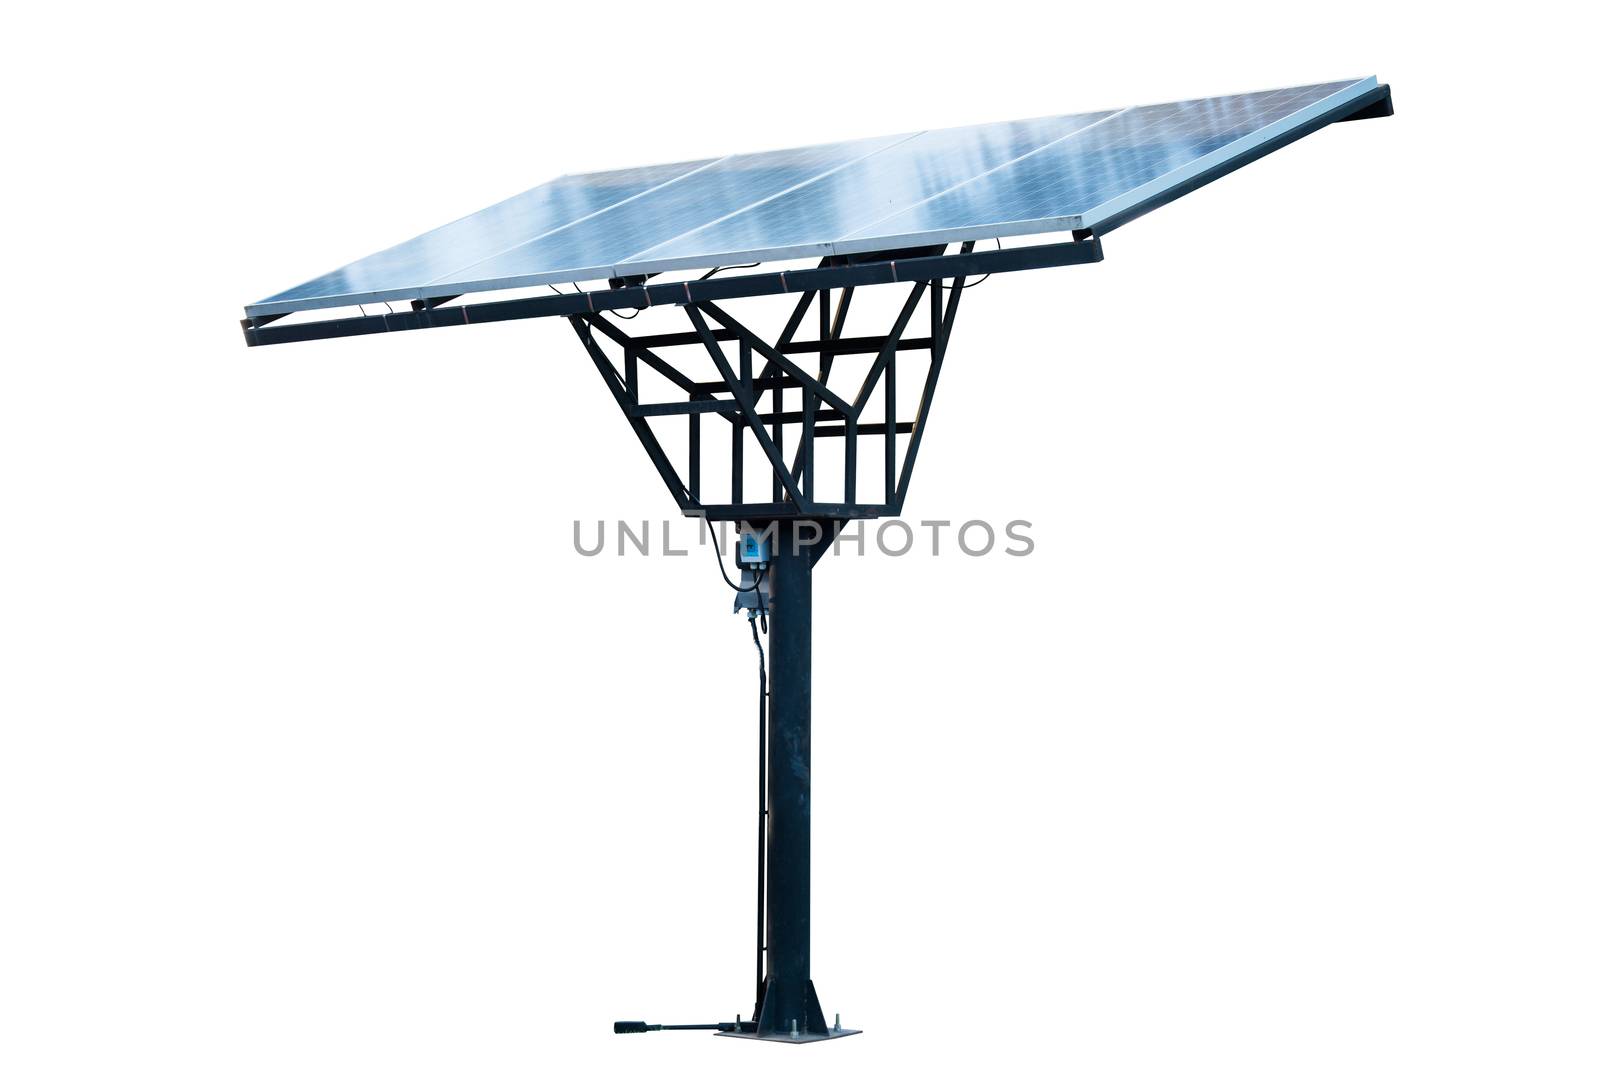 Solar panels system on the pole isolated on white background work with clipping path.